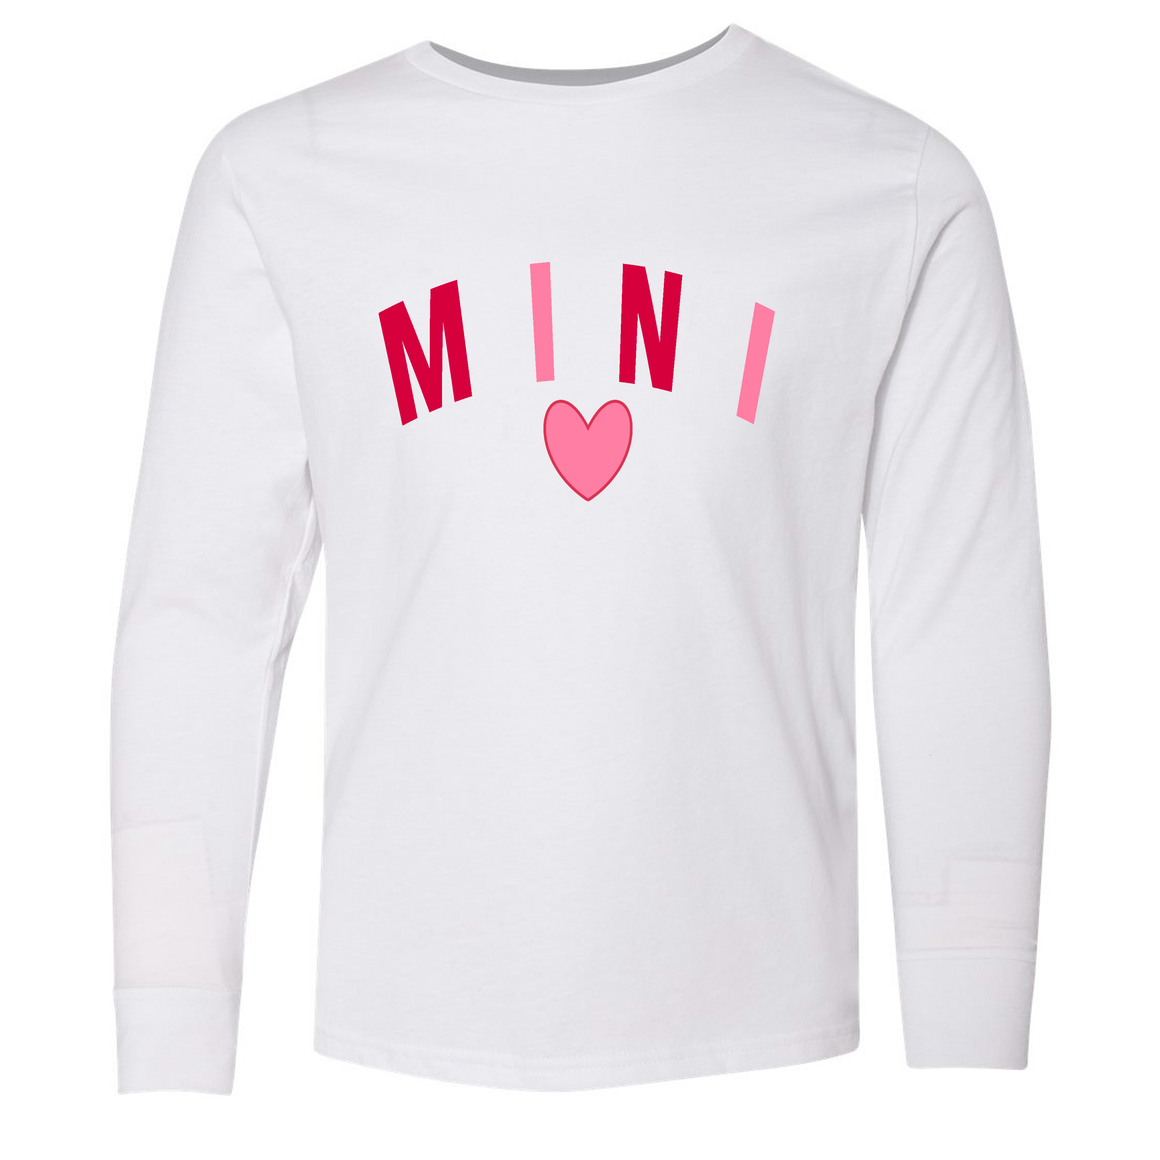 Kid's "Mini" Long Sleeve T-Shirt ( Infant, Toddler, and Youth)